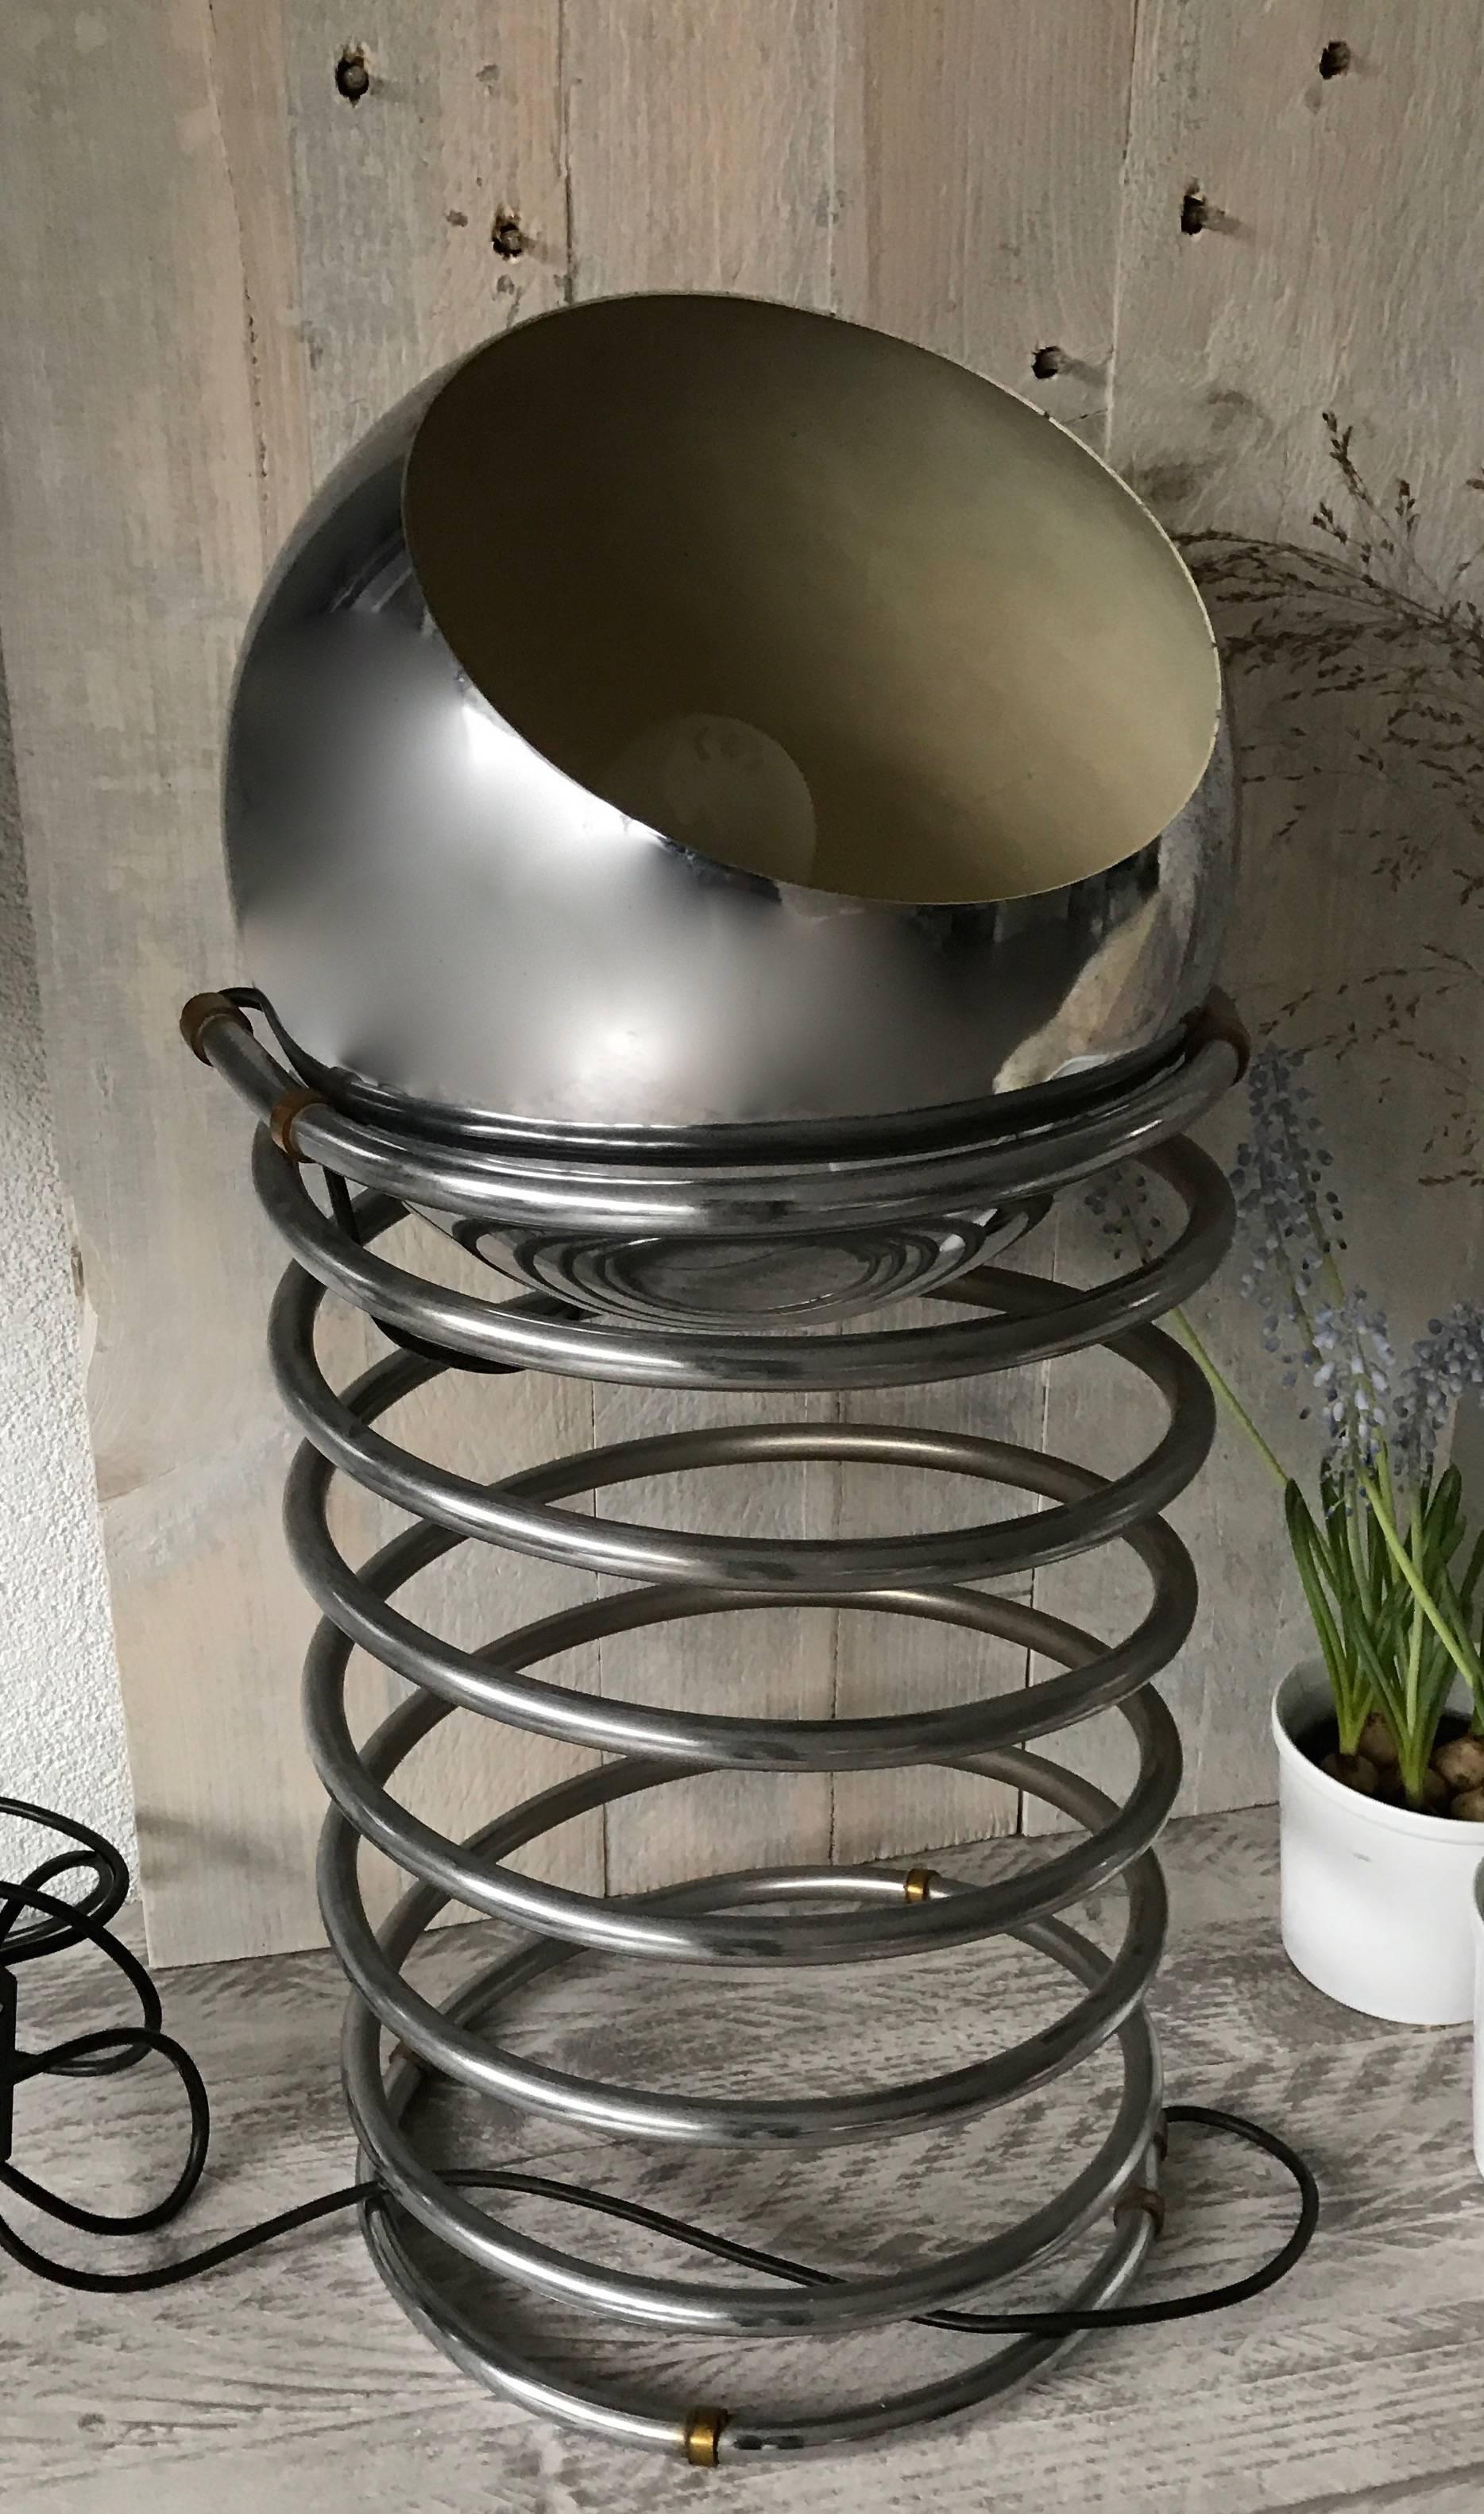 German Modern 1970s Spiral Table or Floor Lamp Attributed to Ingo Maurer For Sale